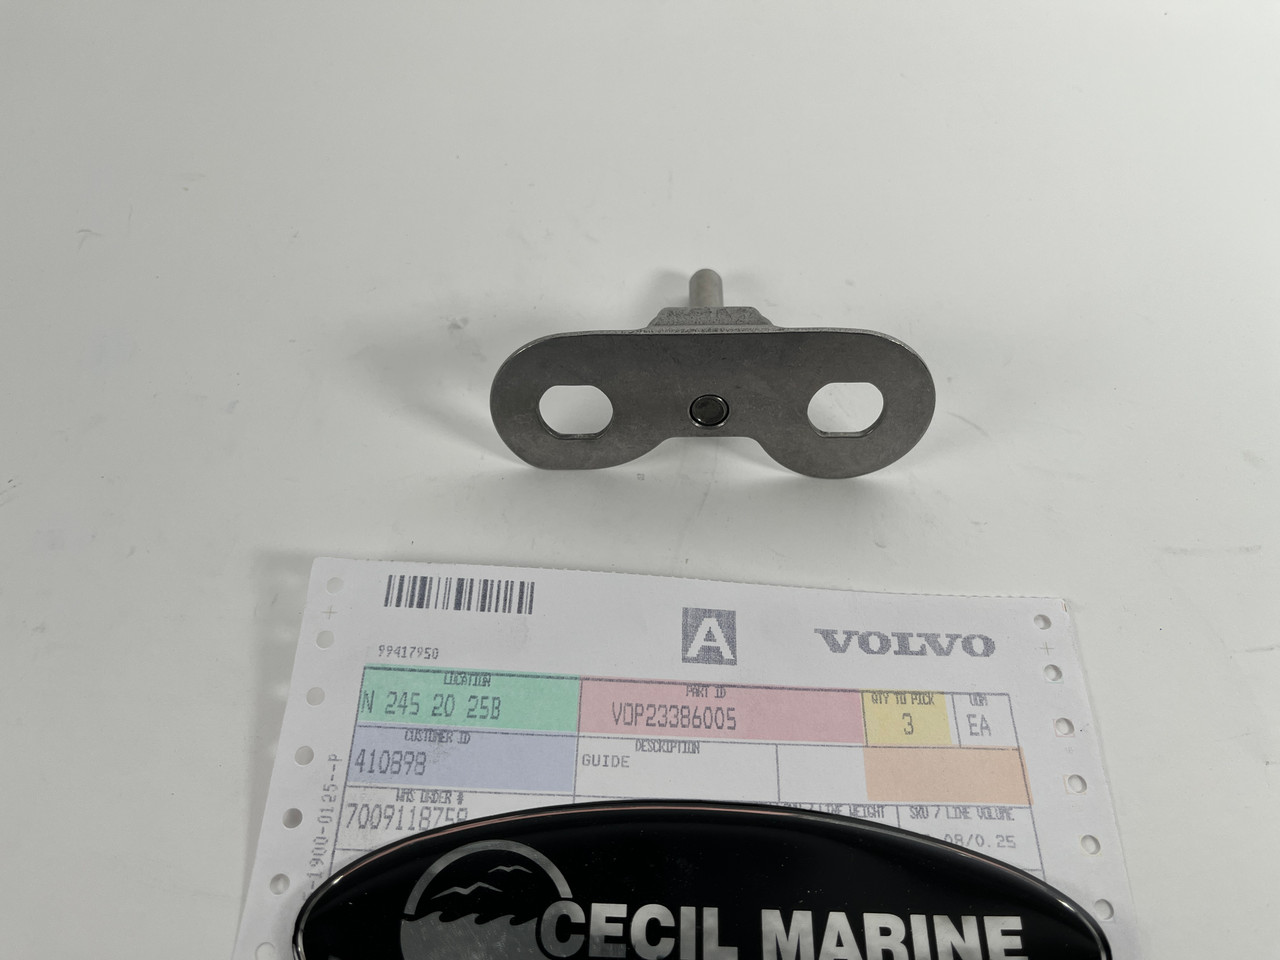 $79.99* GENUINE VOLVO no tax* GUIDE 23386005 *In Stock And Ready To Ship!